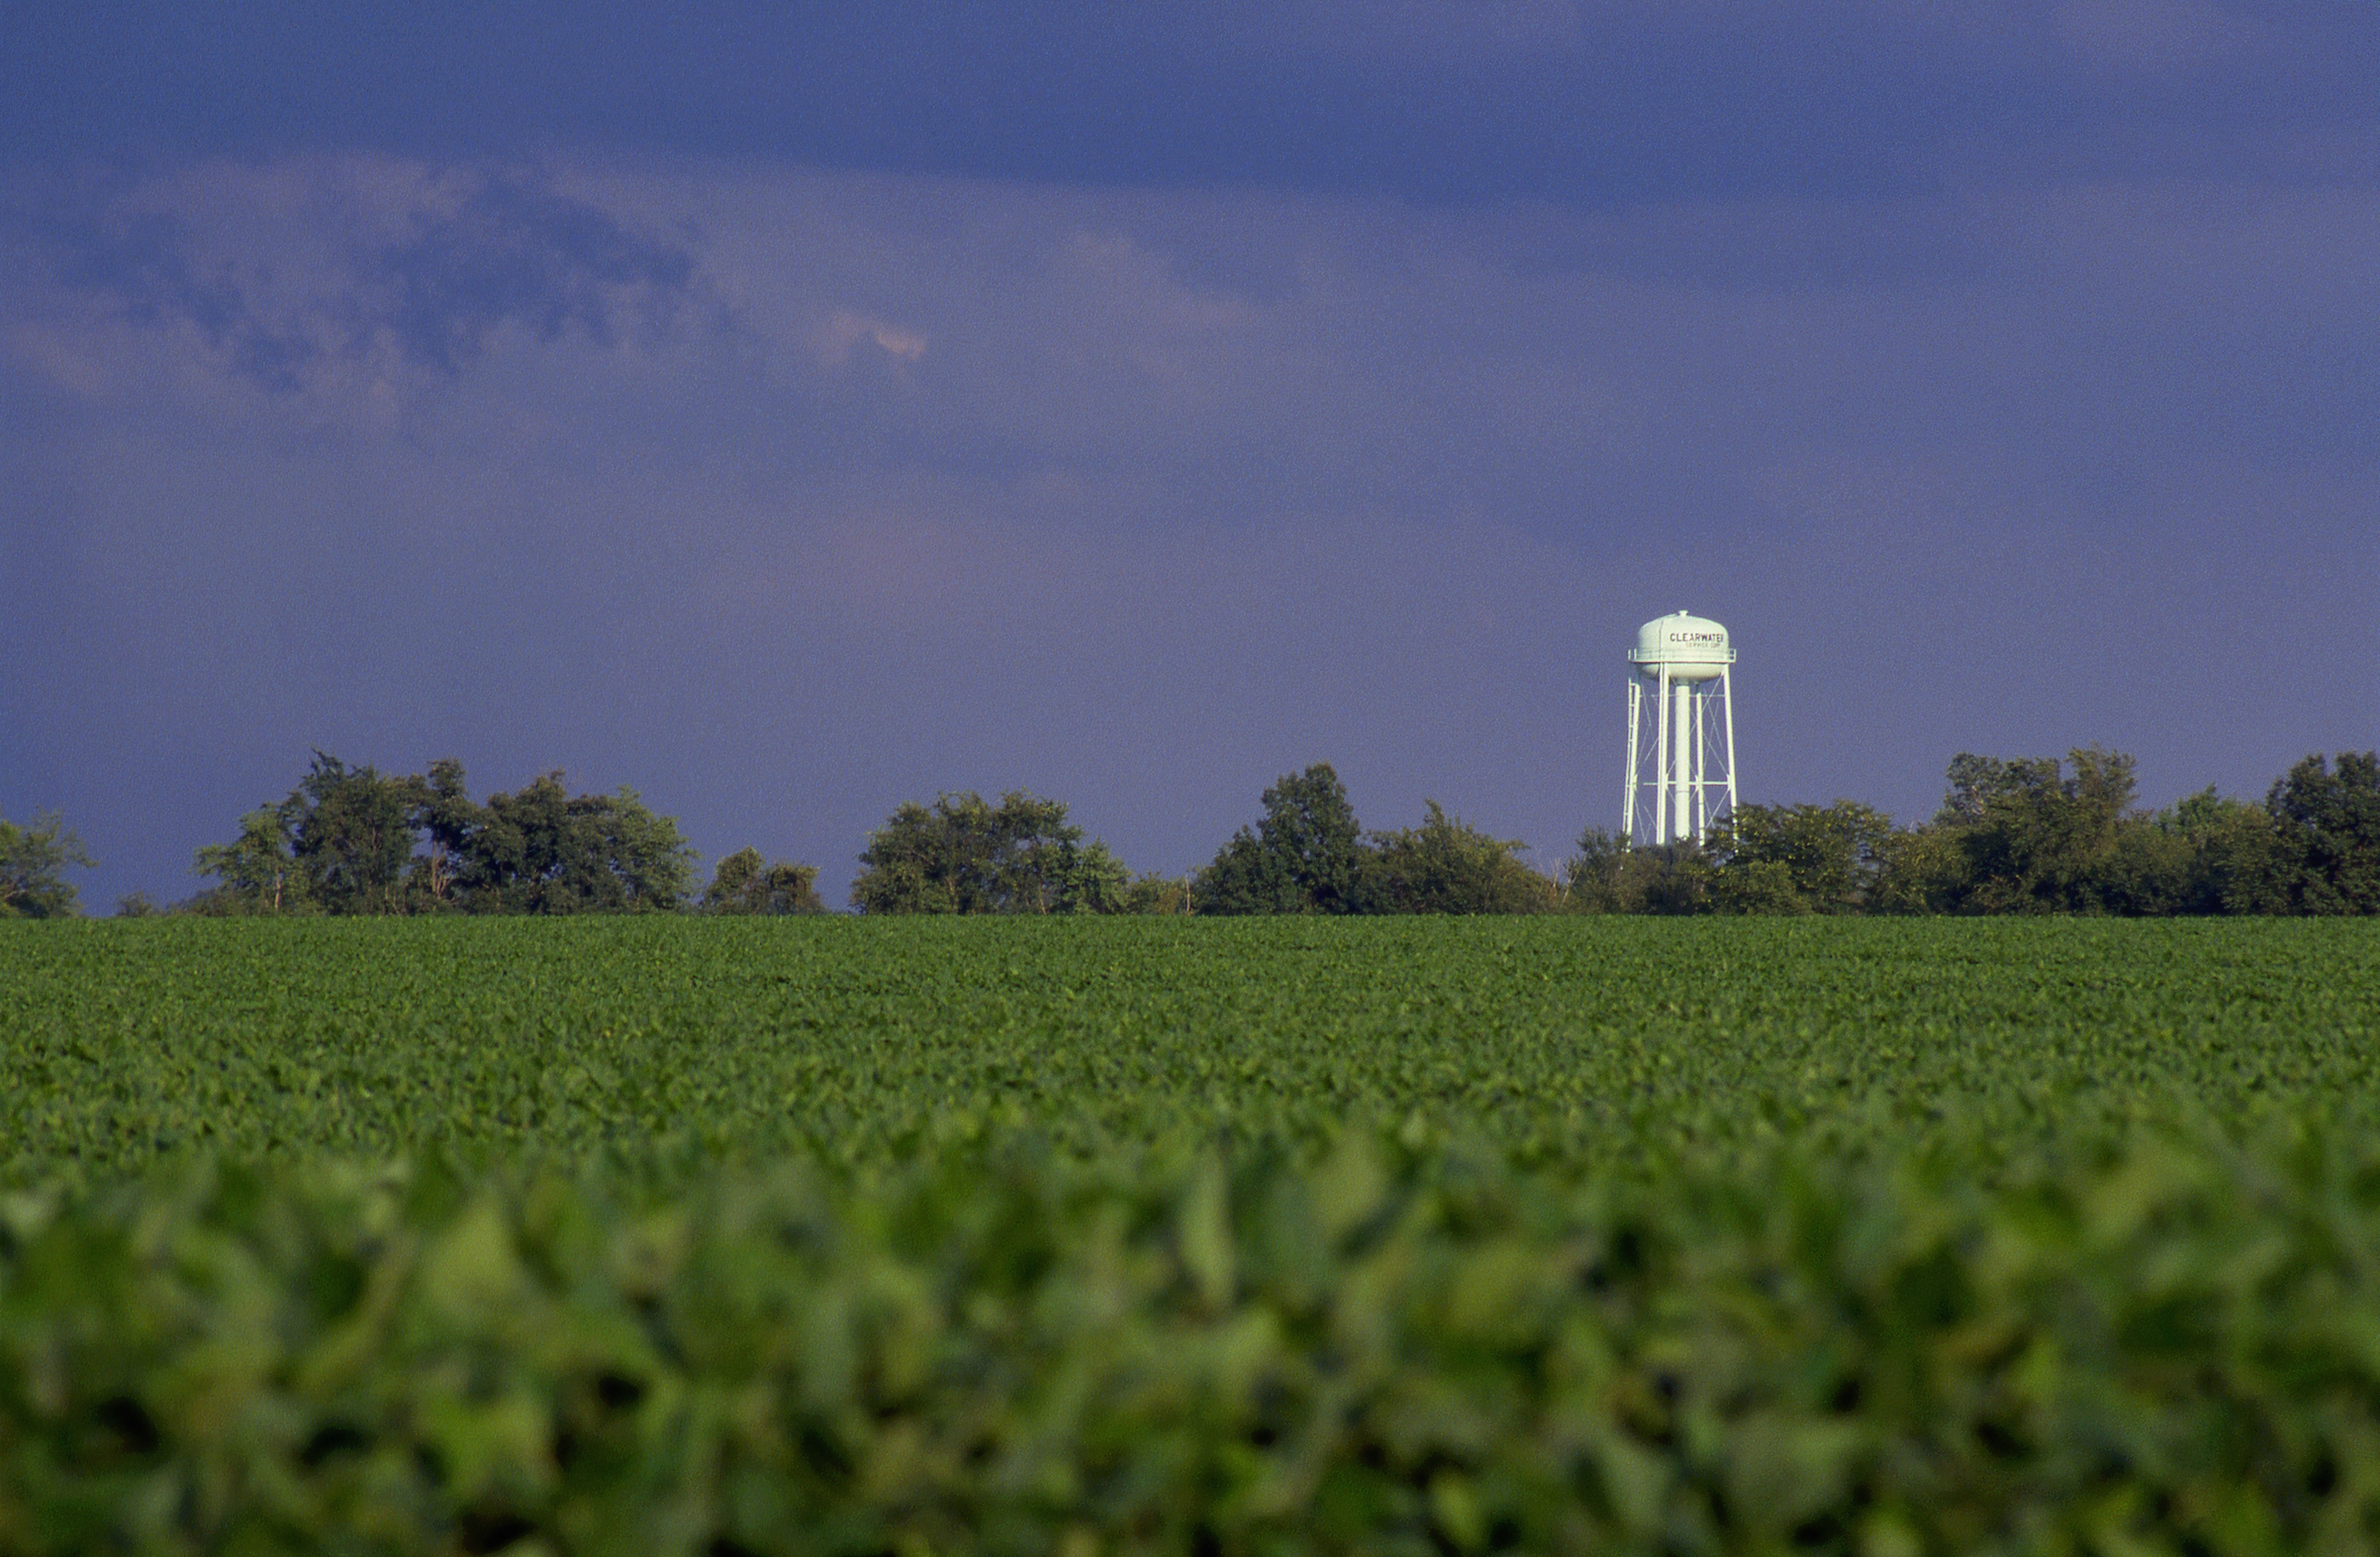 Soybean field and Water tower, Illinois. (Universal Images Group / Getty Images)